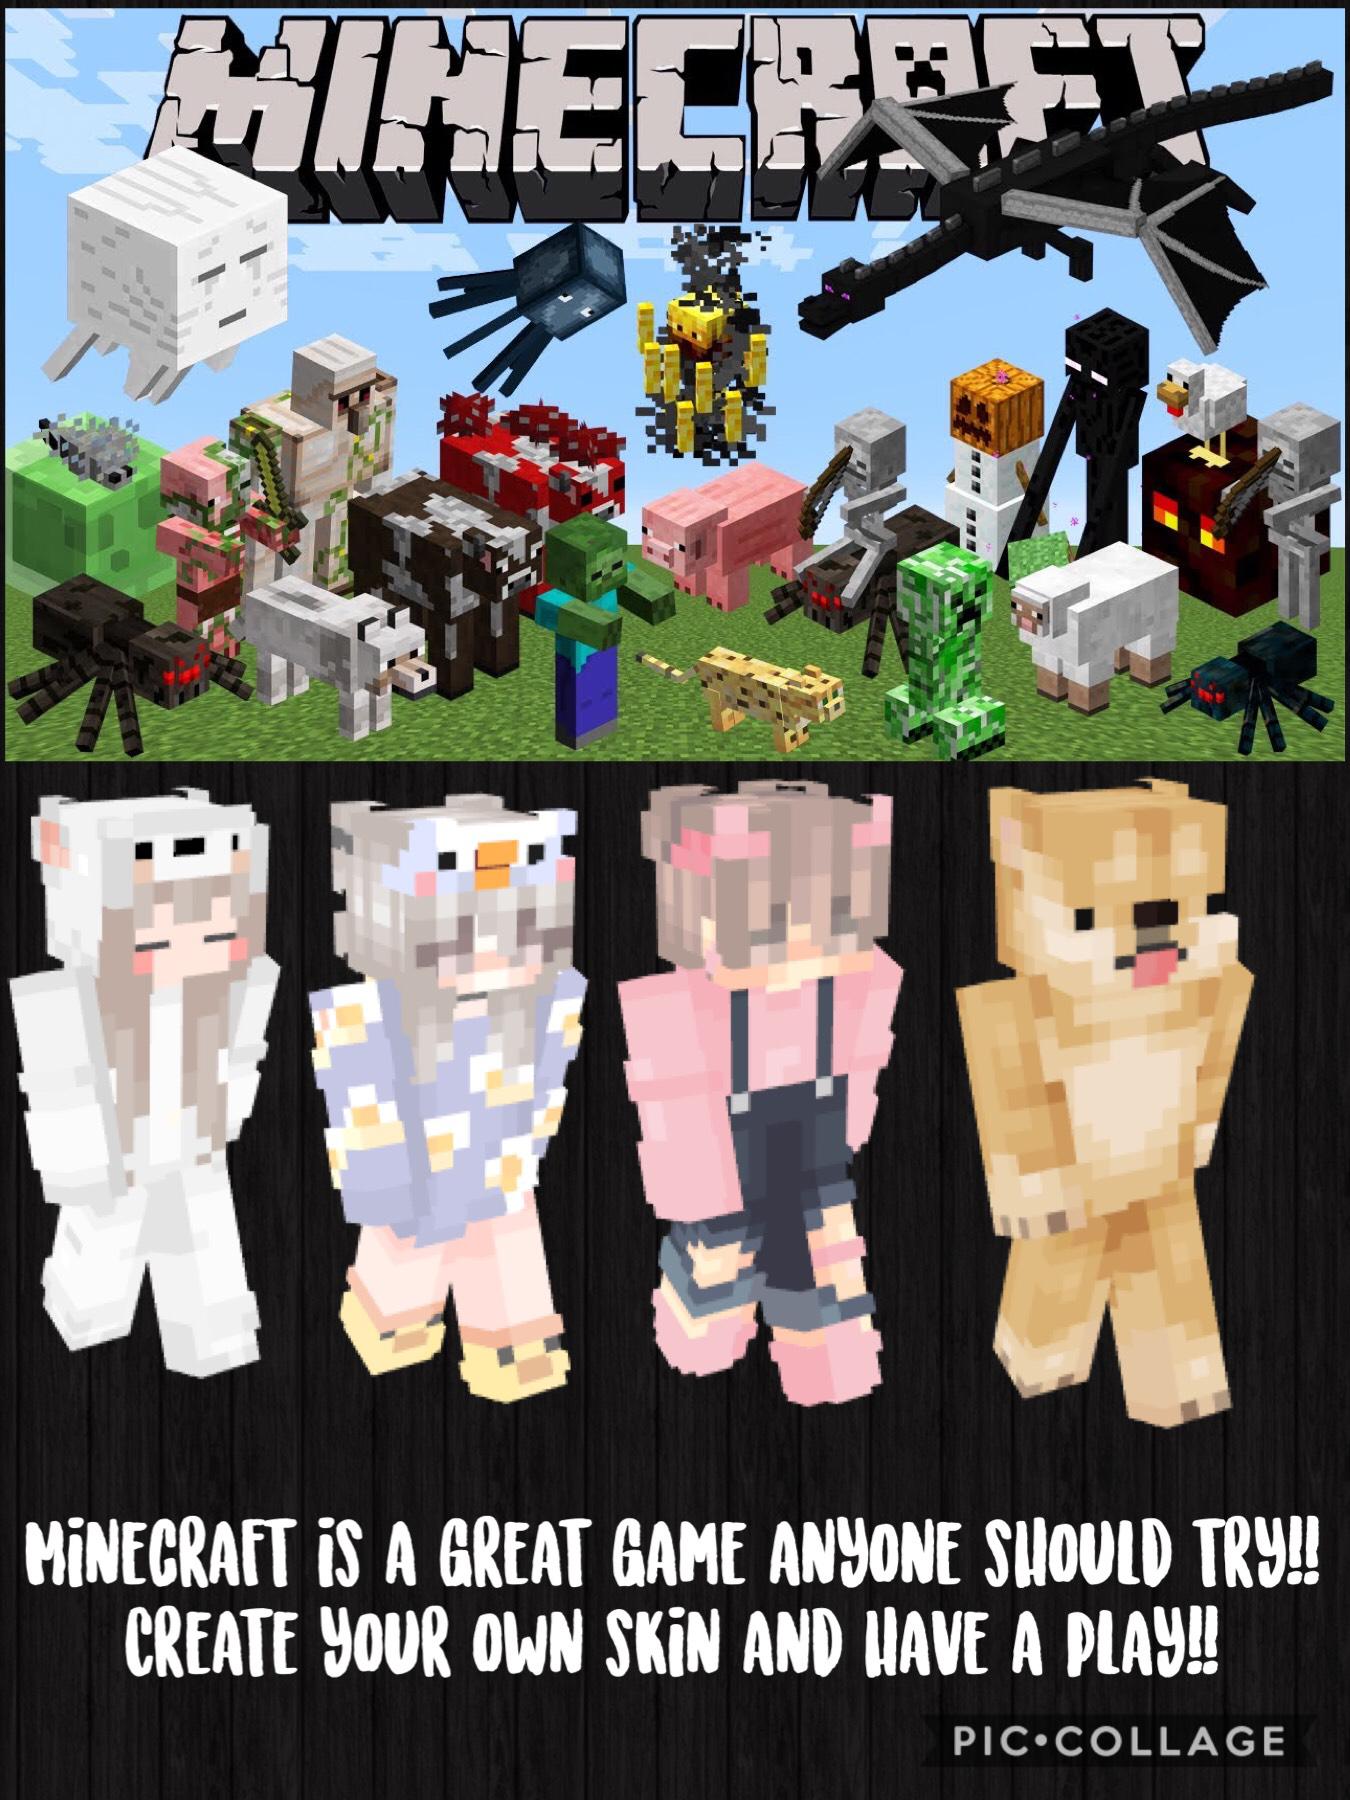 Let's play Minecraft!!